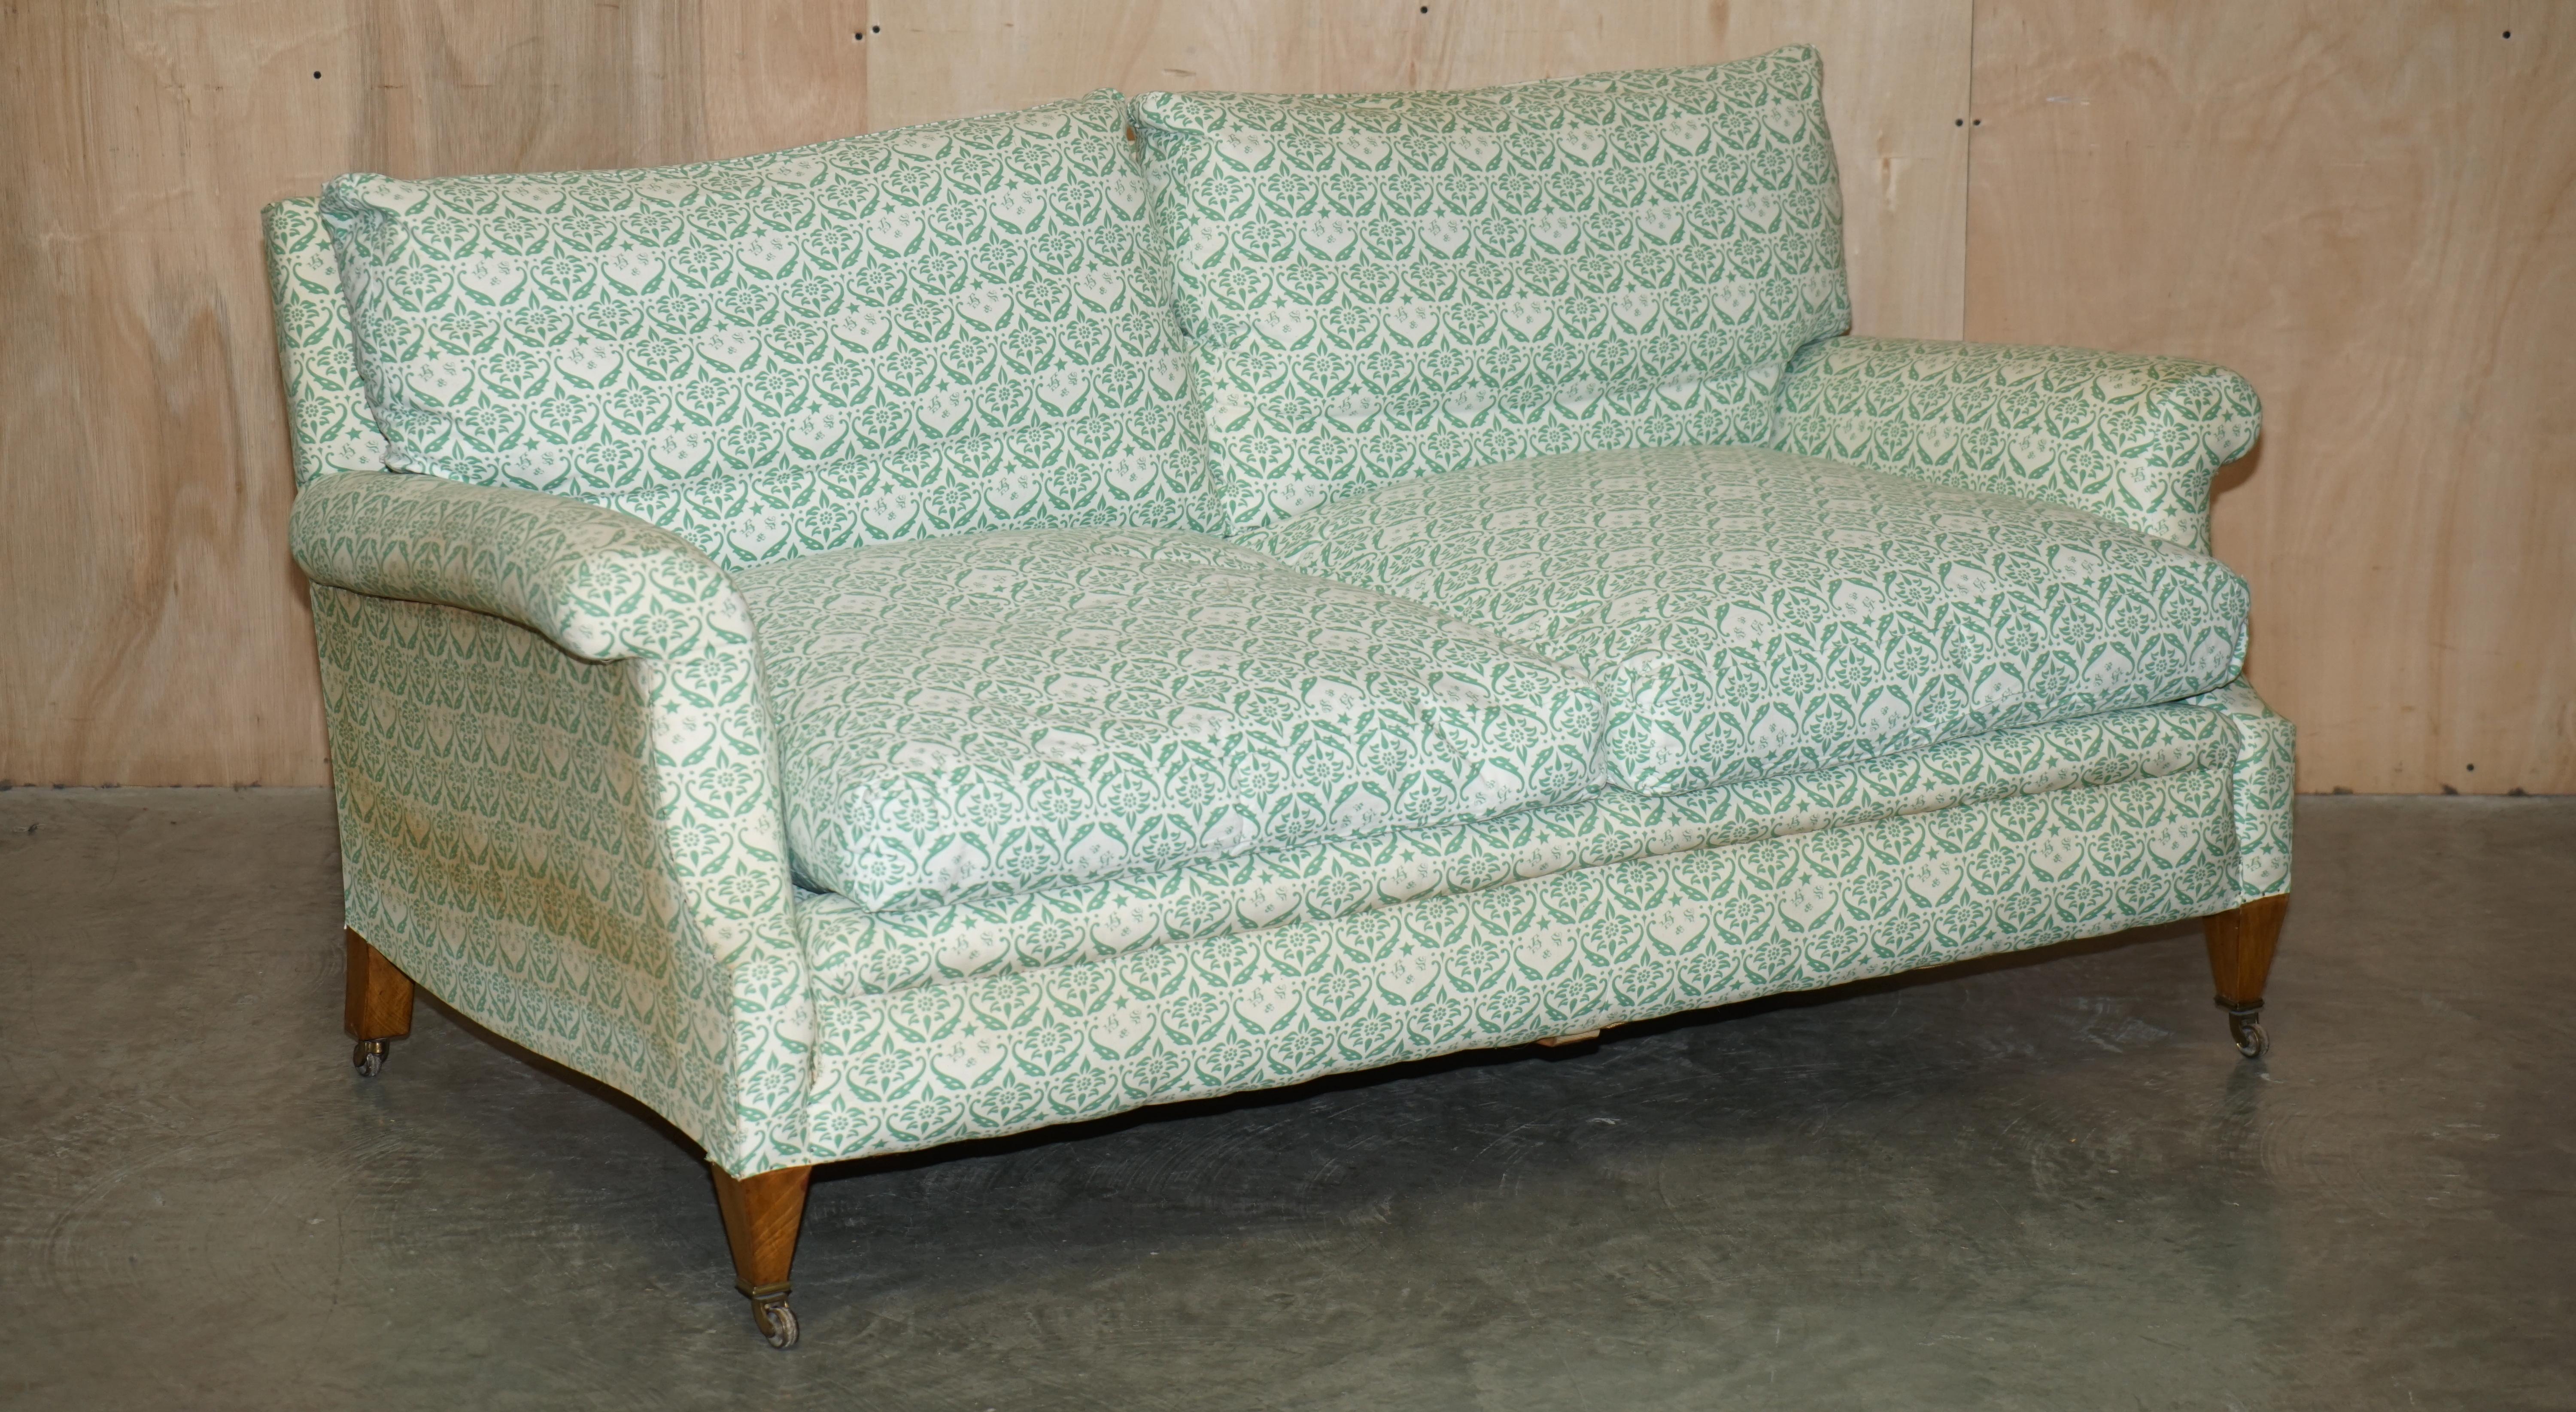 We are delighted to offer for sale very rare and original pair of Howard & Son’s Lenygon & Morant sofas with the original ticking fabric. 

These have to be the most comfortable pair of sofas I have ever sat on, the cushions are light fibre